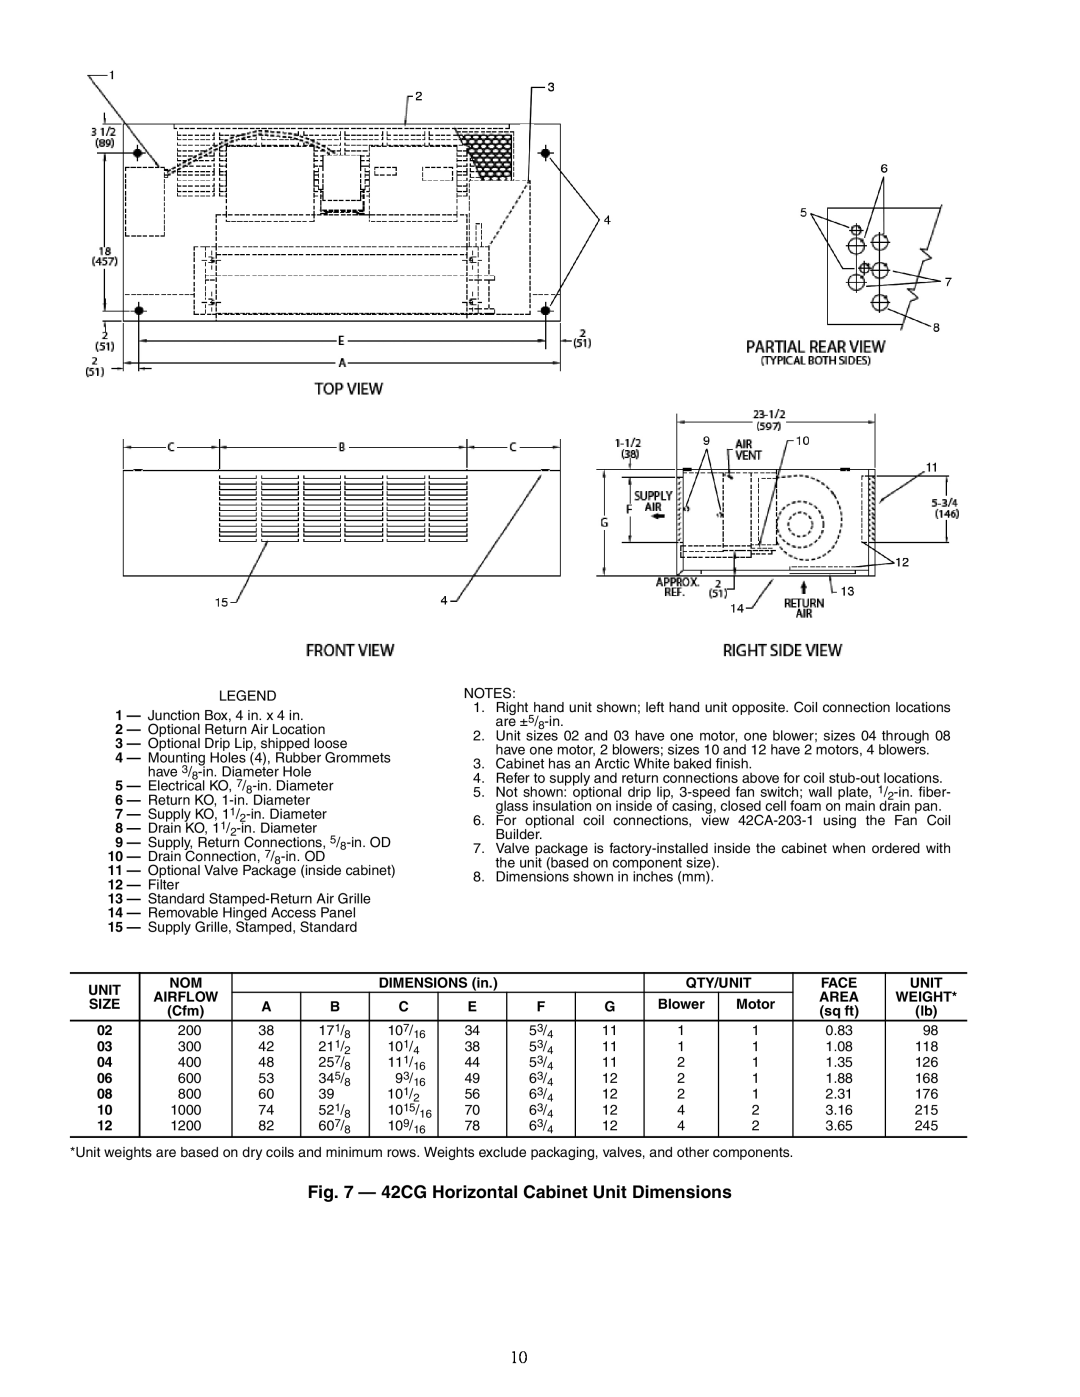 Carrier 42D, 42S, 42V specifications A42-4105, 42CG Horizontal Cabinet Unit Dimensions 